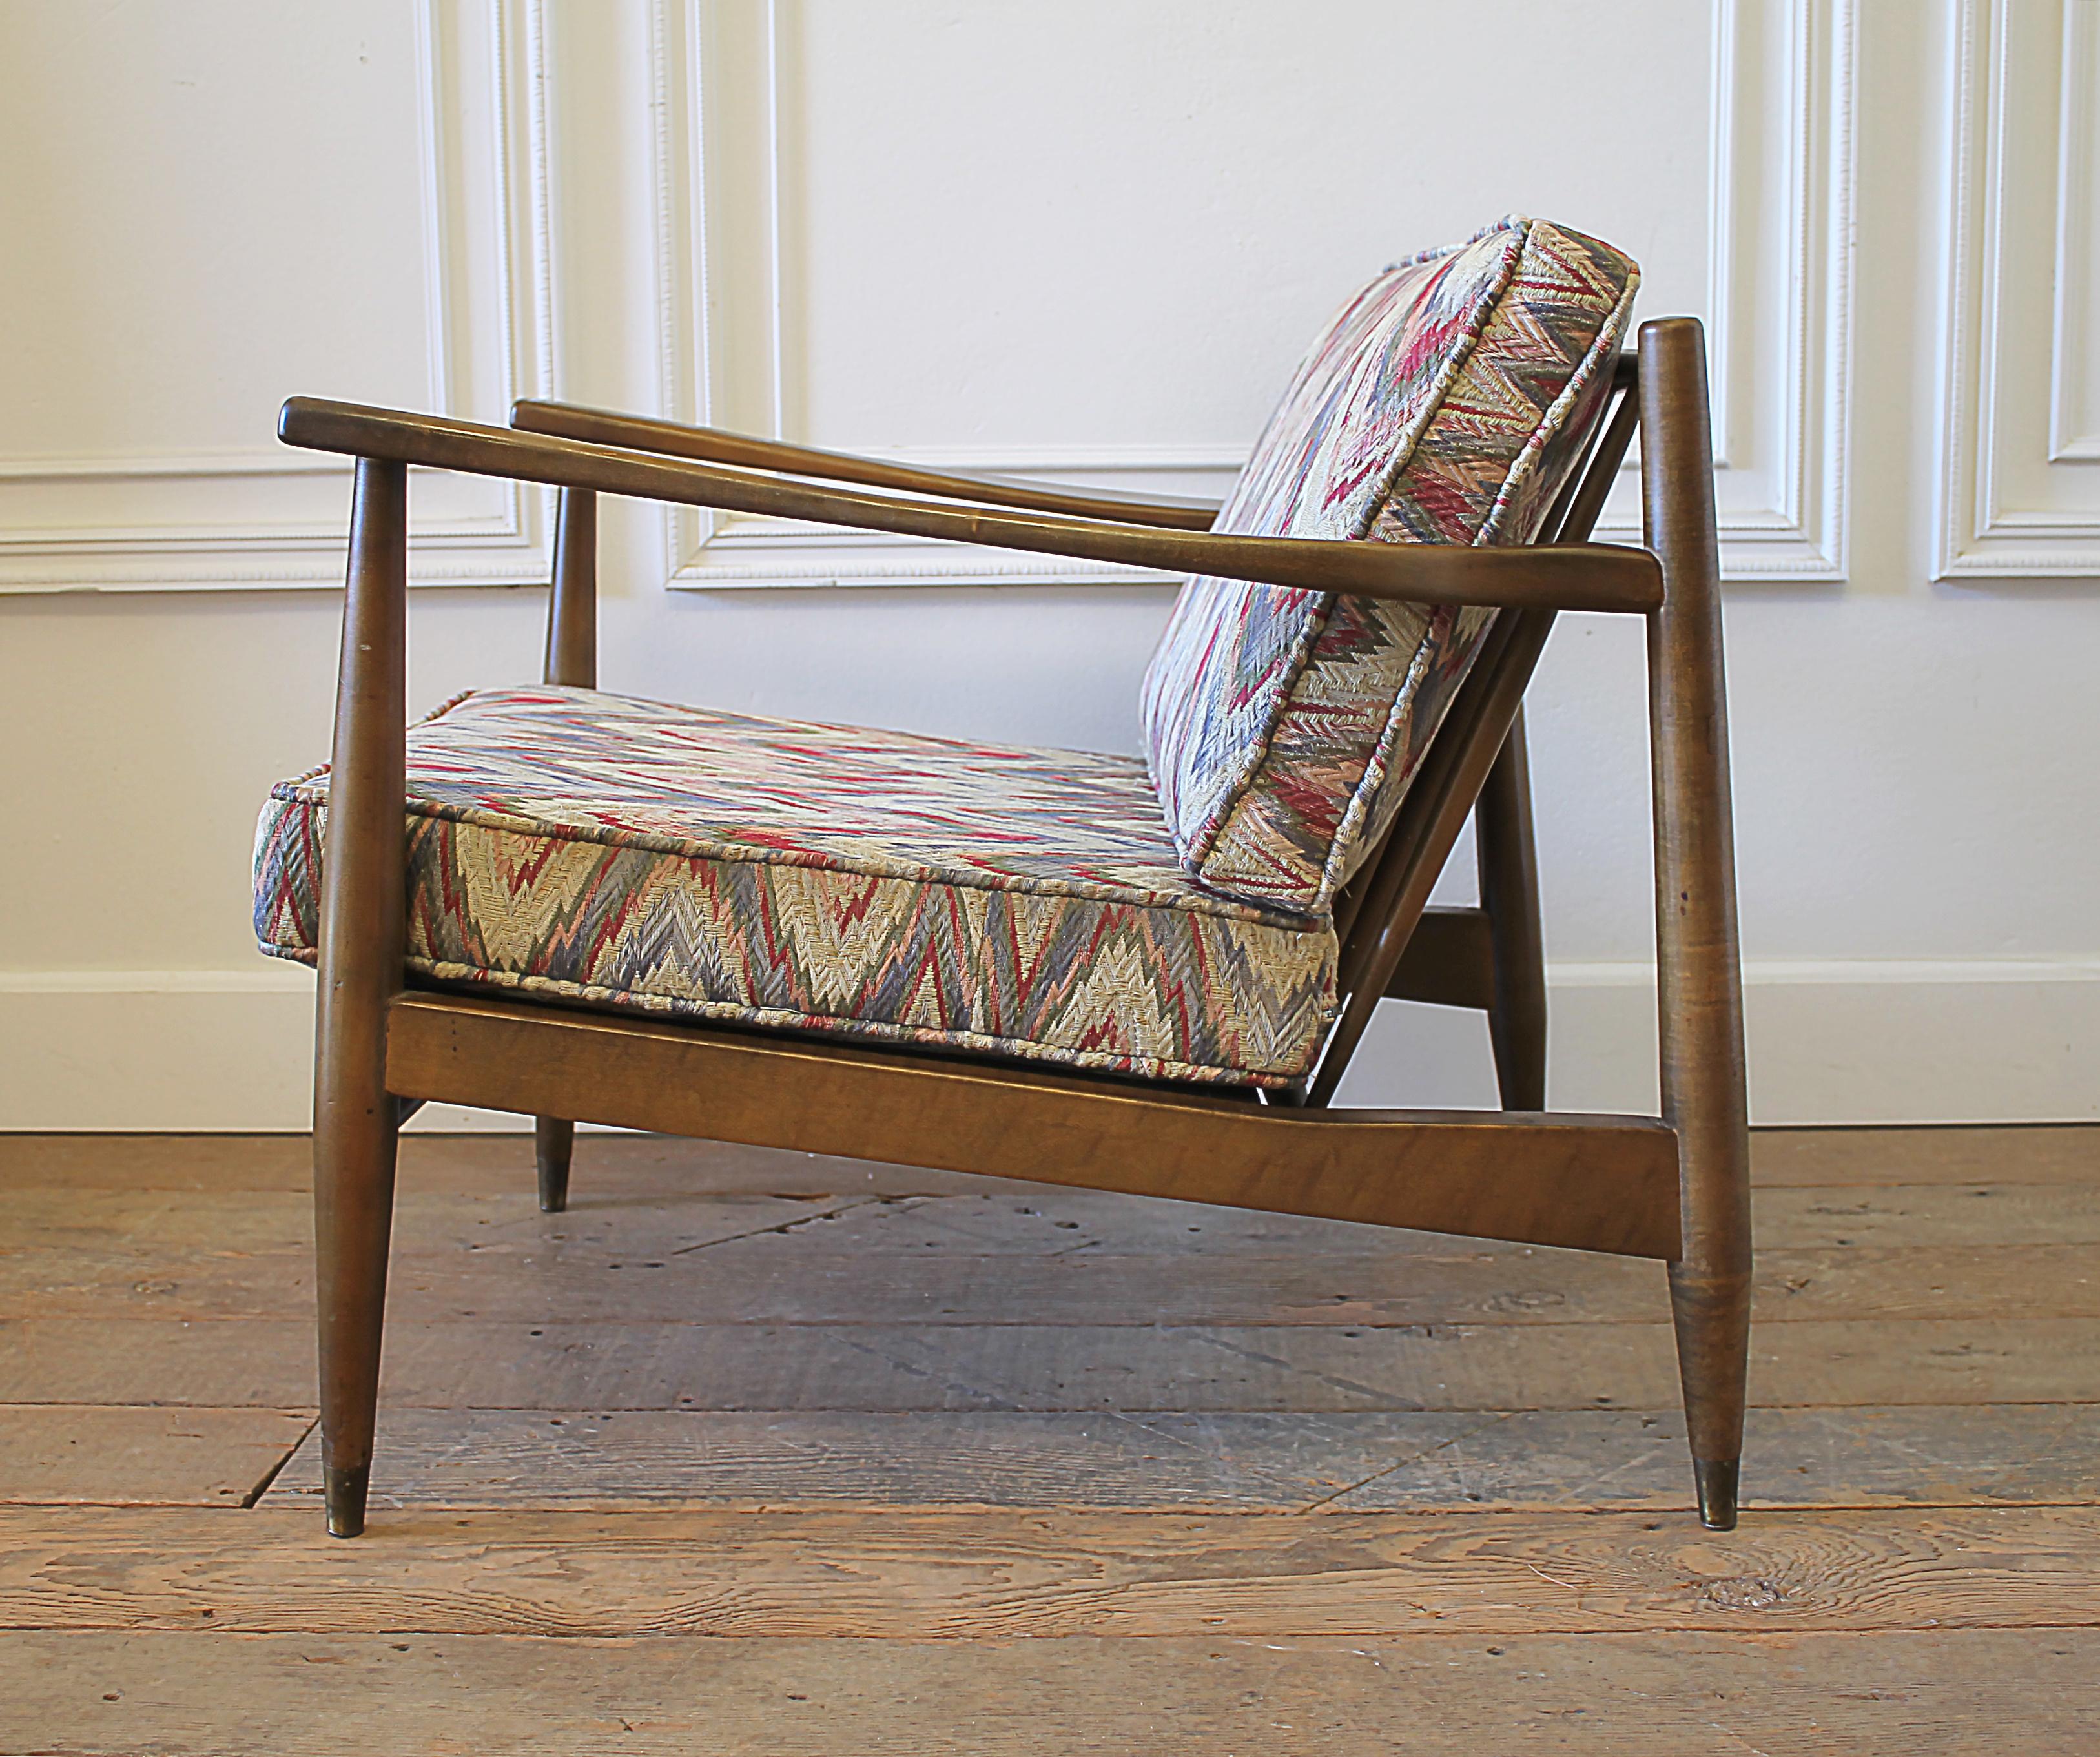 20th Century Danish Modern Chair with Flame Stitch Upholstered Cushions For Sale